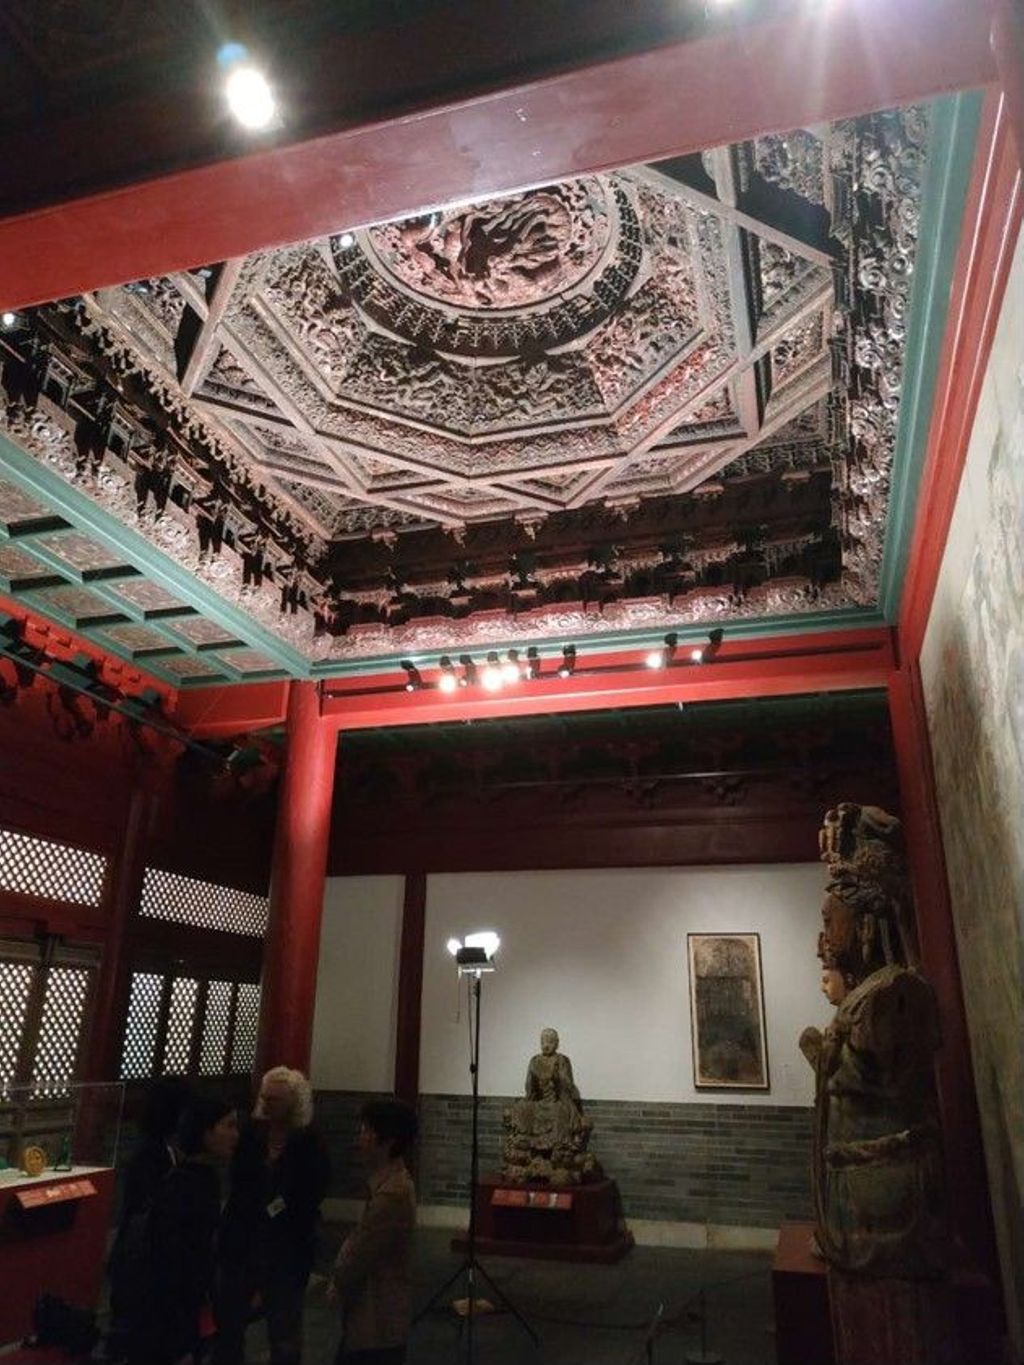 Miniature of Coffered Ceiling from Zhihua Hall (Zhihuadian, Hall of Transforming Wisdom), research team conducting scanning